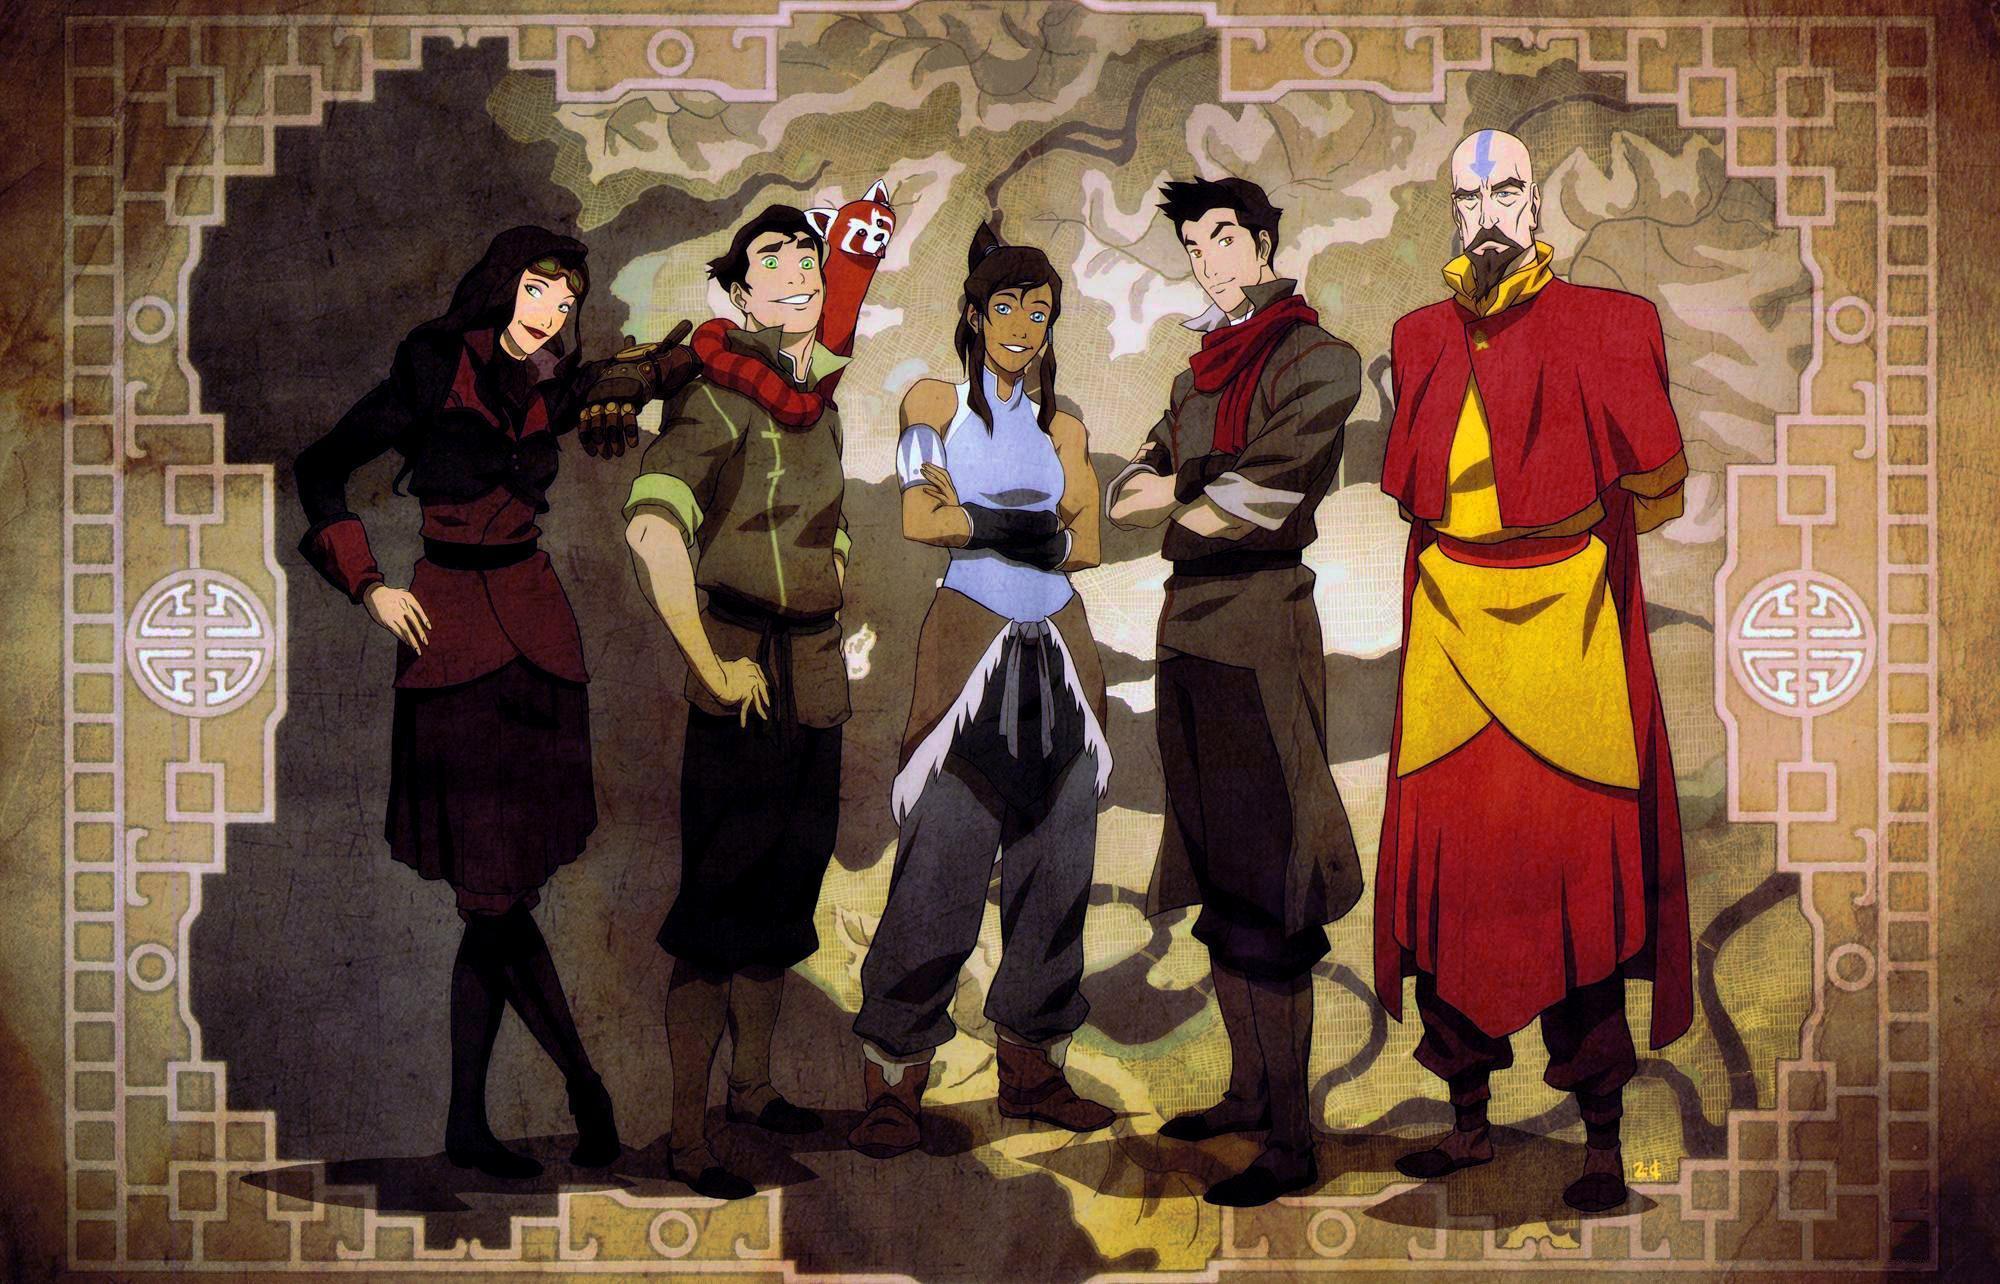 Avatar the last Airbender Wallpaper for Download. More Avatar